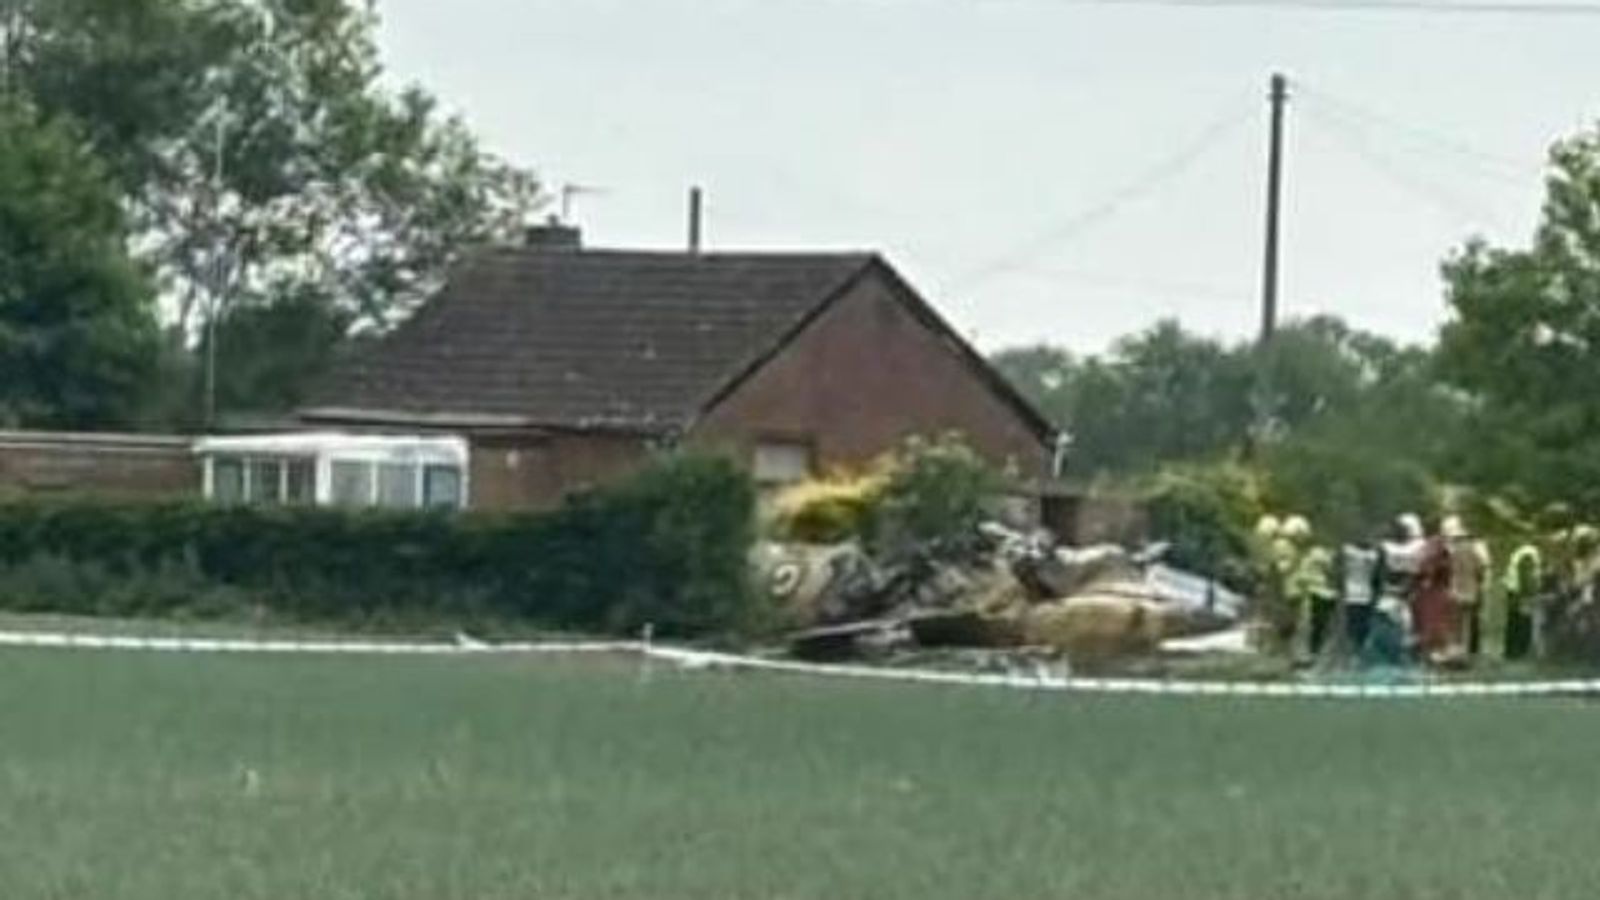 RAF pilot dies after Spitfire crashes in field near Coningsby base in Lincolnshire